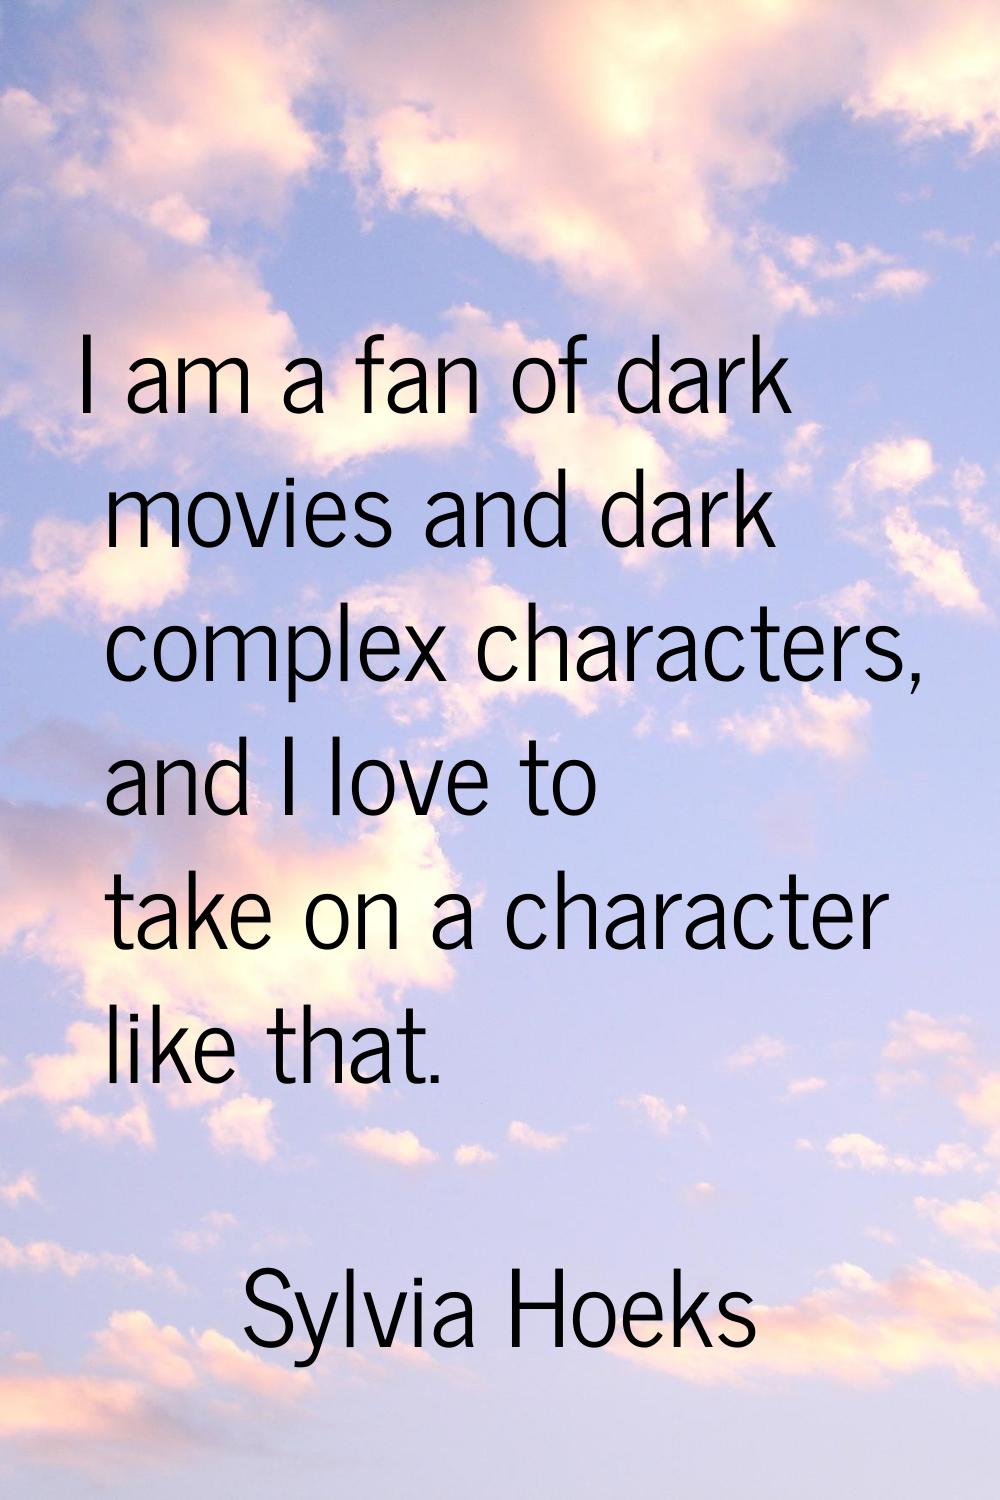 I am a fan of dark movies and dark complex characters, and I love to take on a character like that.